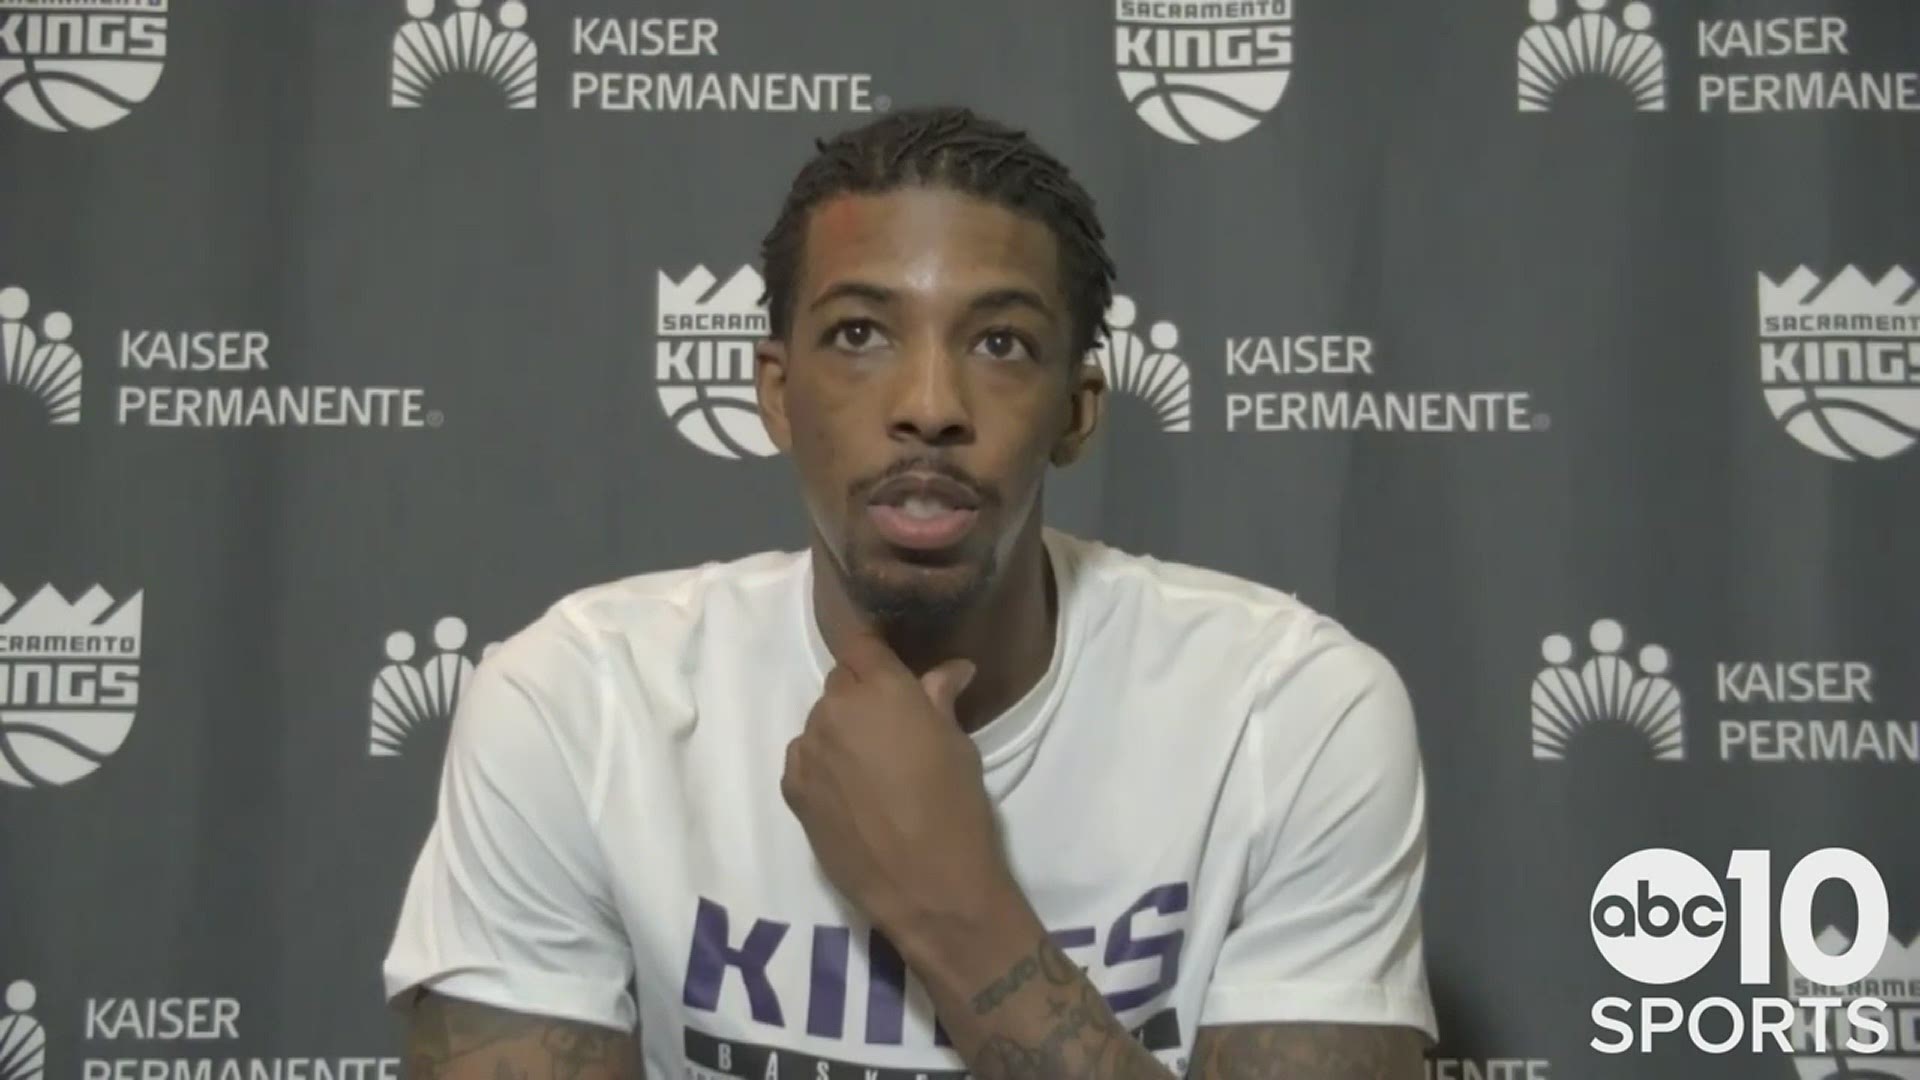 Kings guard Delon Wright gives his thoughts on closing the season out strong following Sunday's 126-98 victory over the Oklahoma City Thunder in Sacramento.